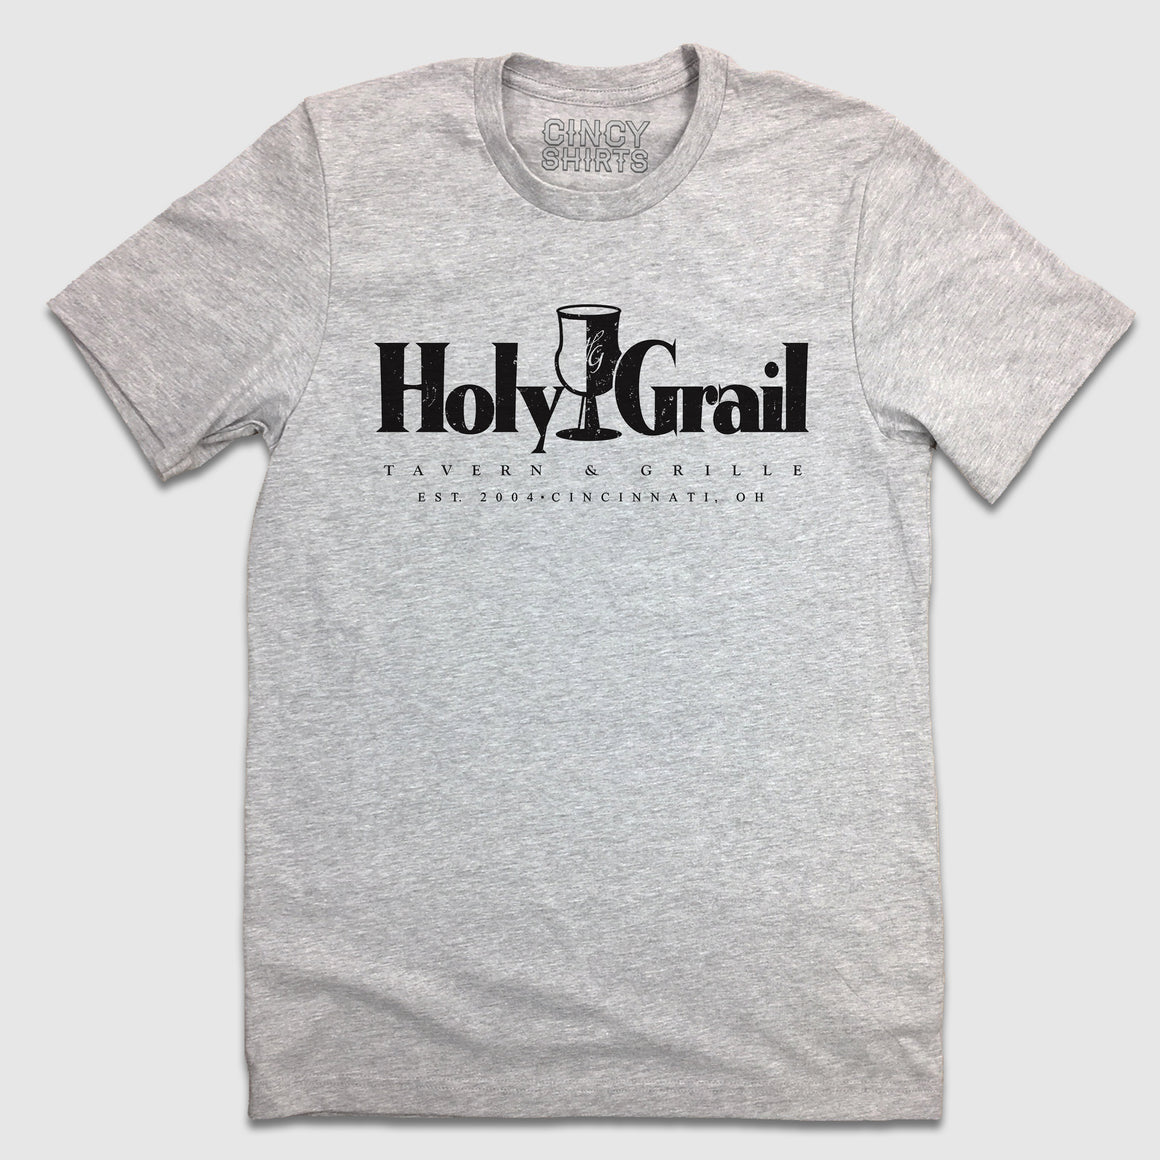 Holy Grail Tavern & Grille 1 Color Distress Tee - Cincy Shirts